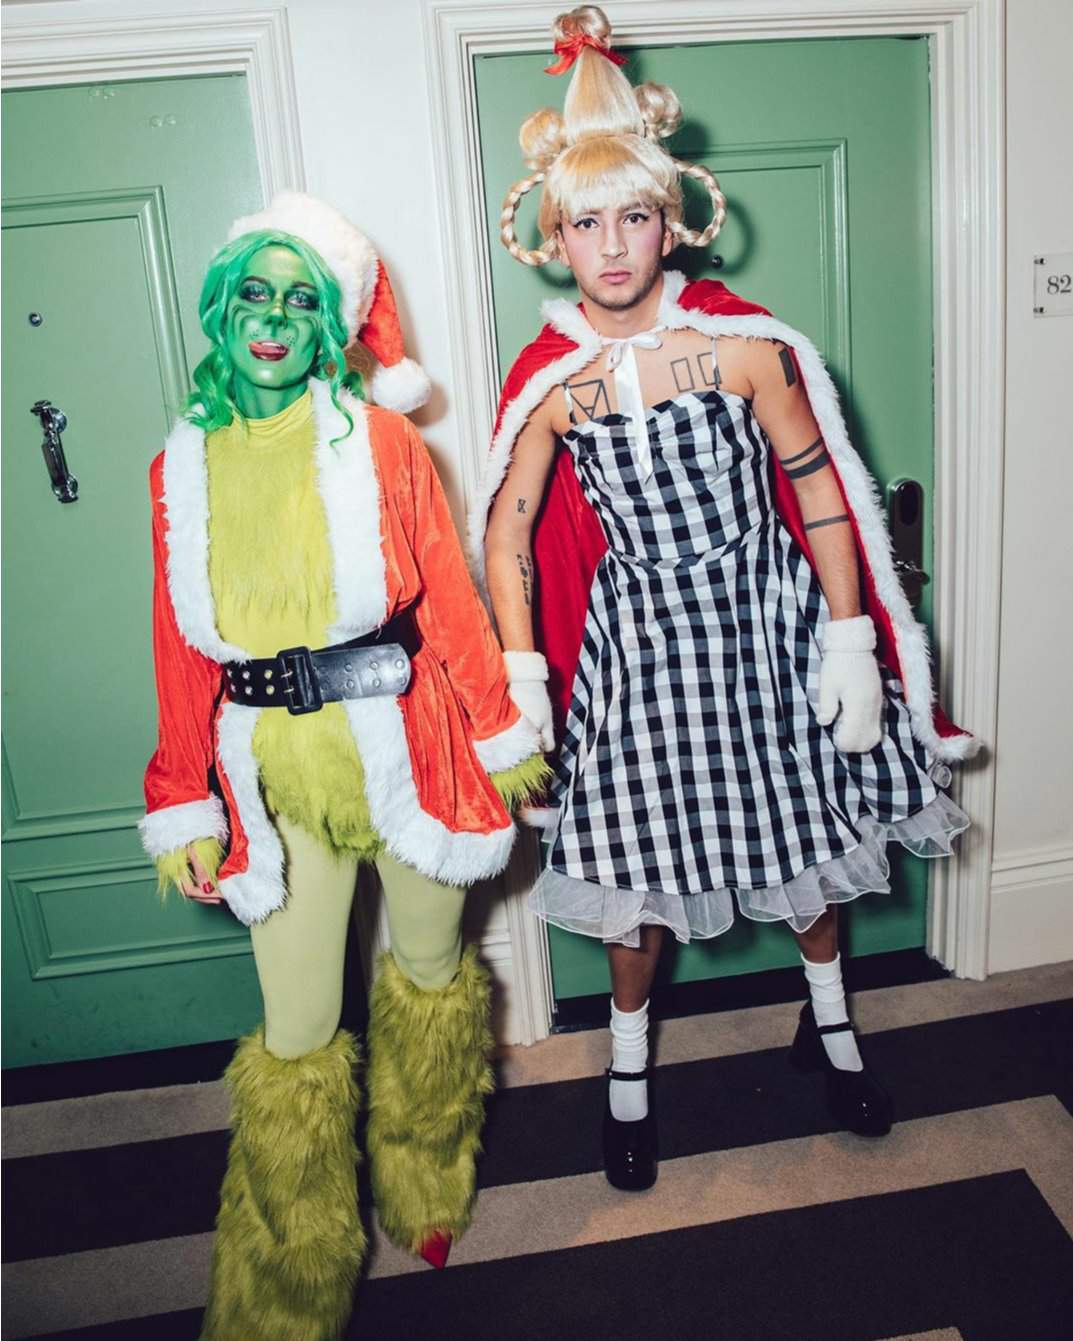 Best costumes, The Grinch and Cindy Lou Who 😂 Clique Amino.